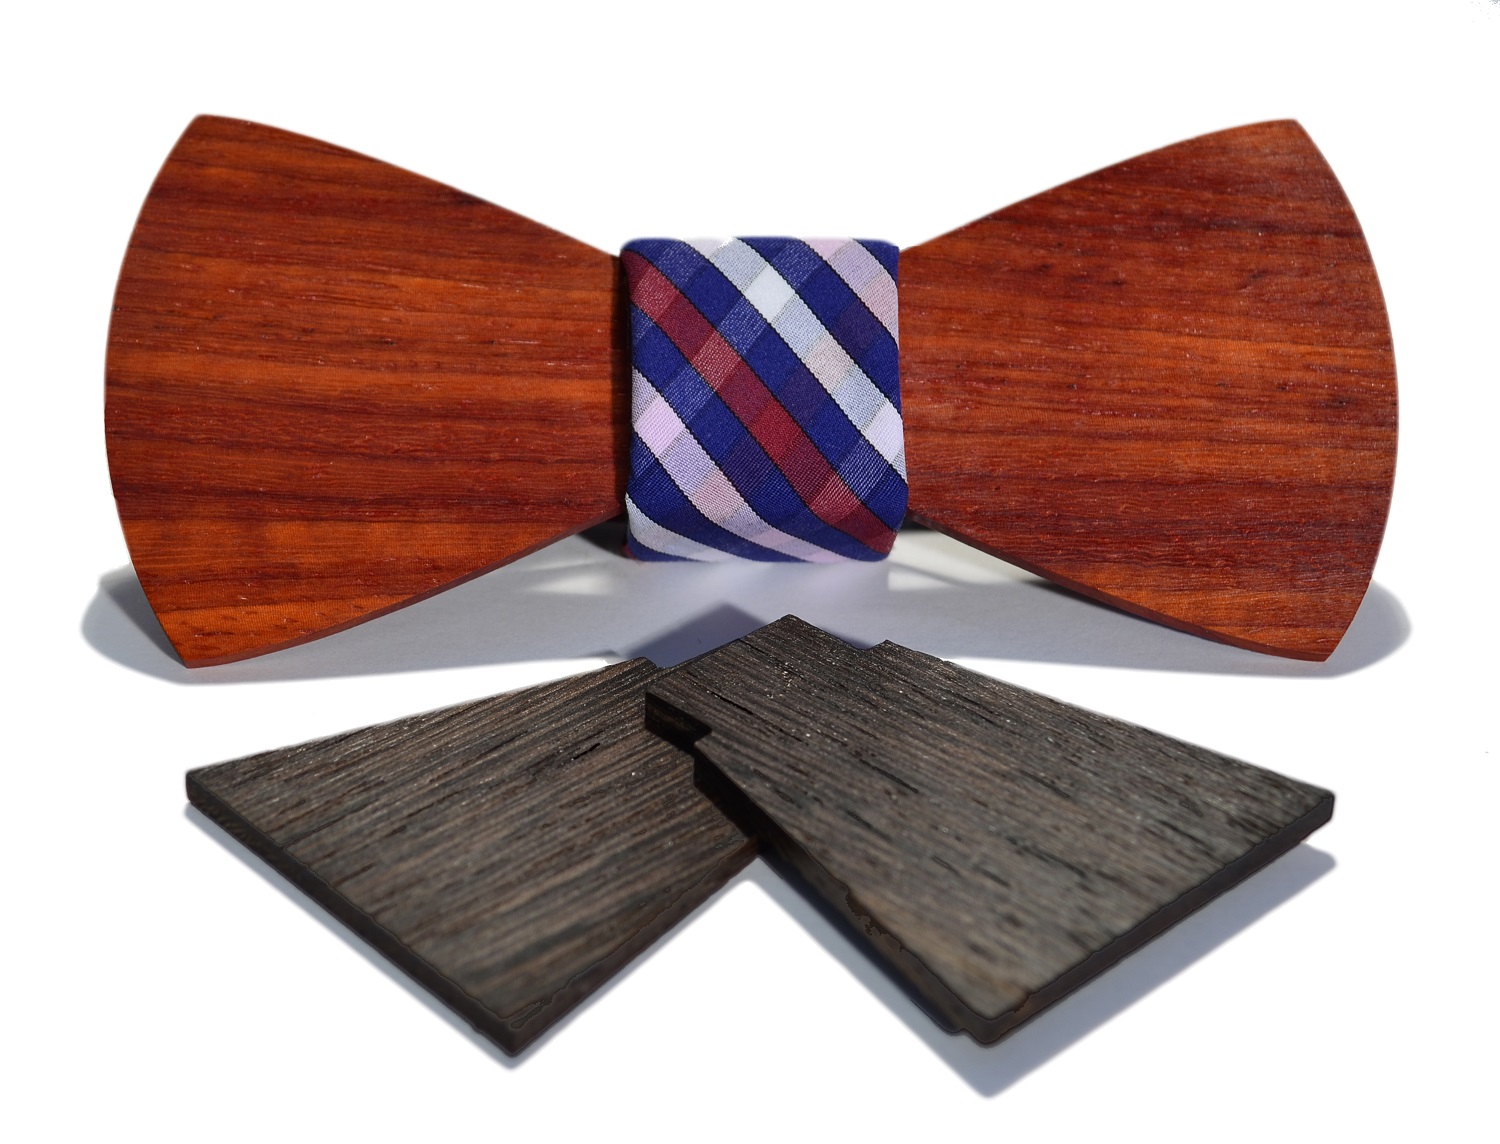 LKXHarleya Handmade Wooden Hollow Bow Tie Collection with Gift Box